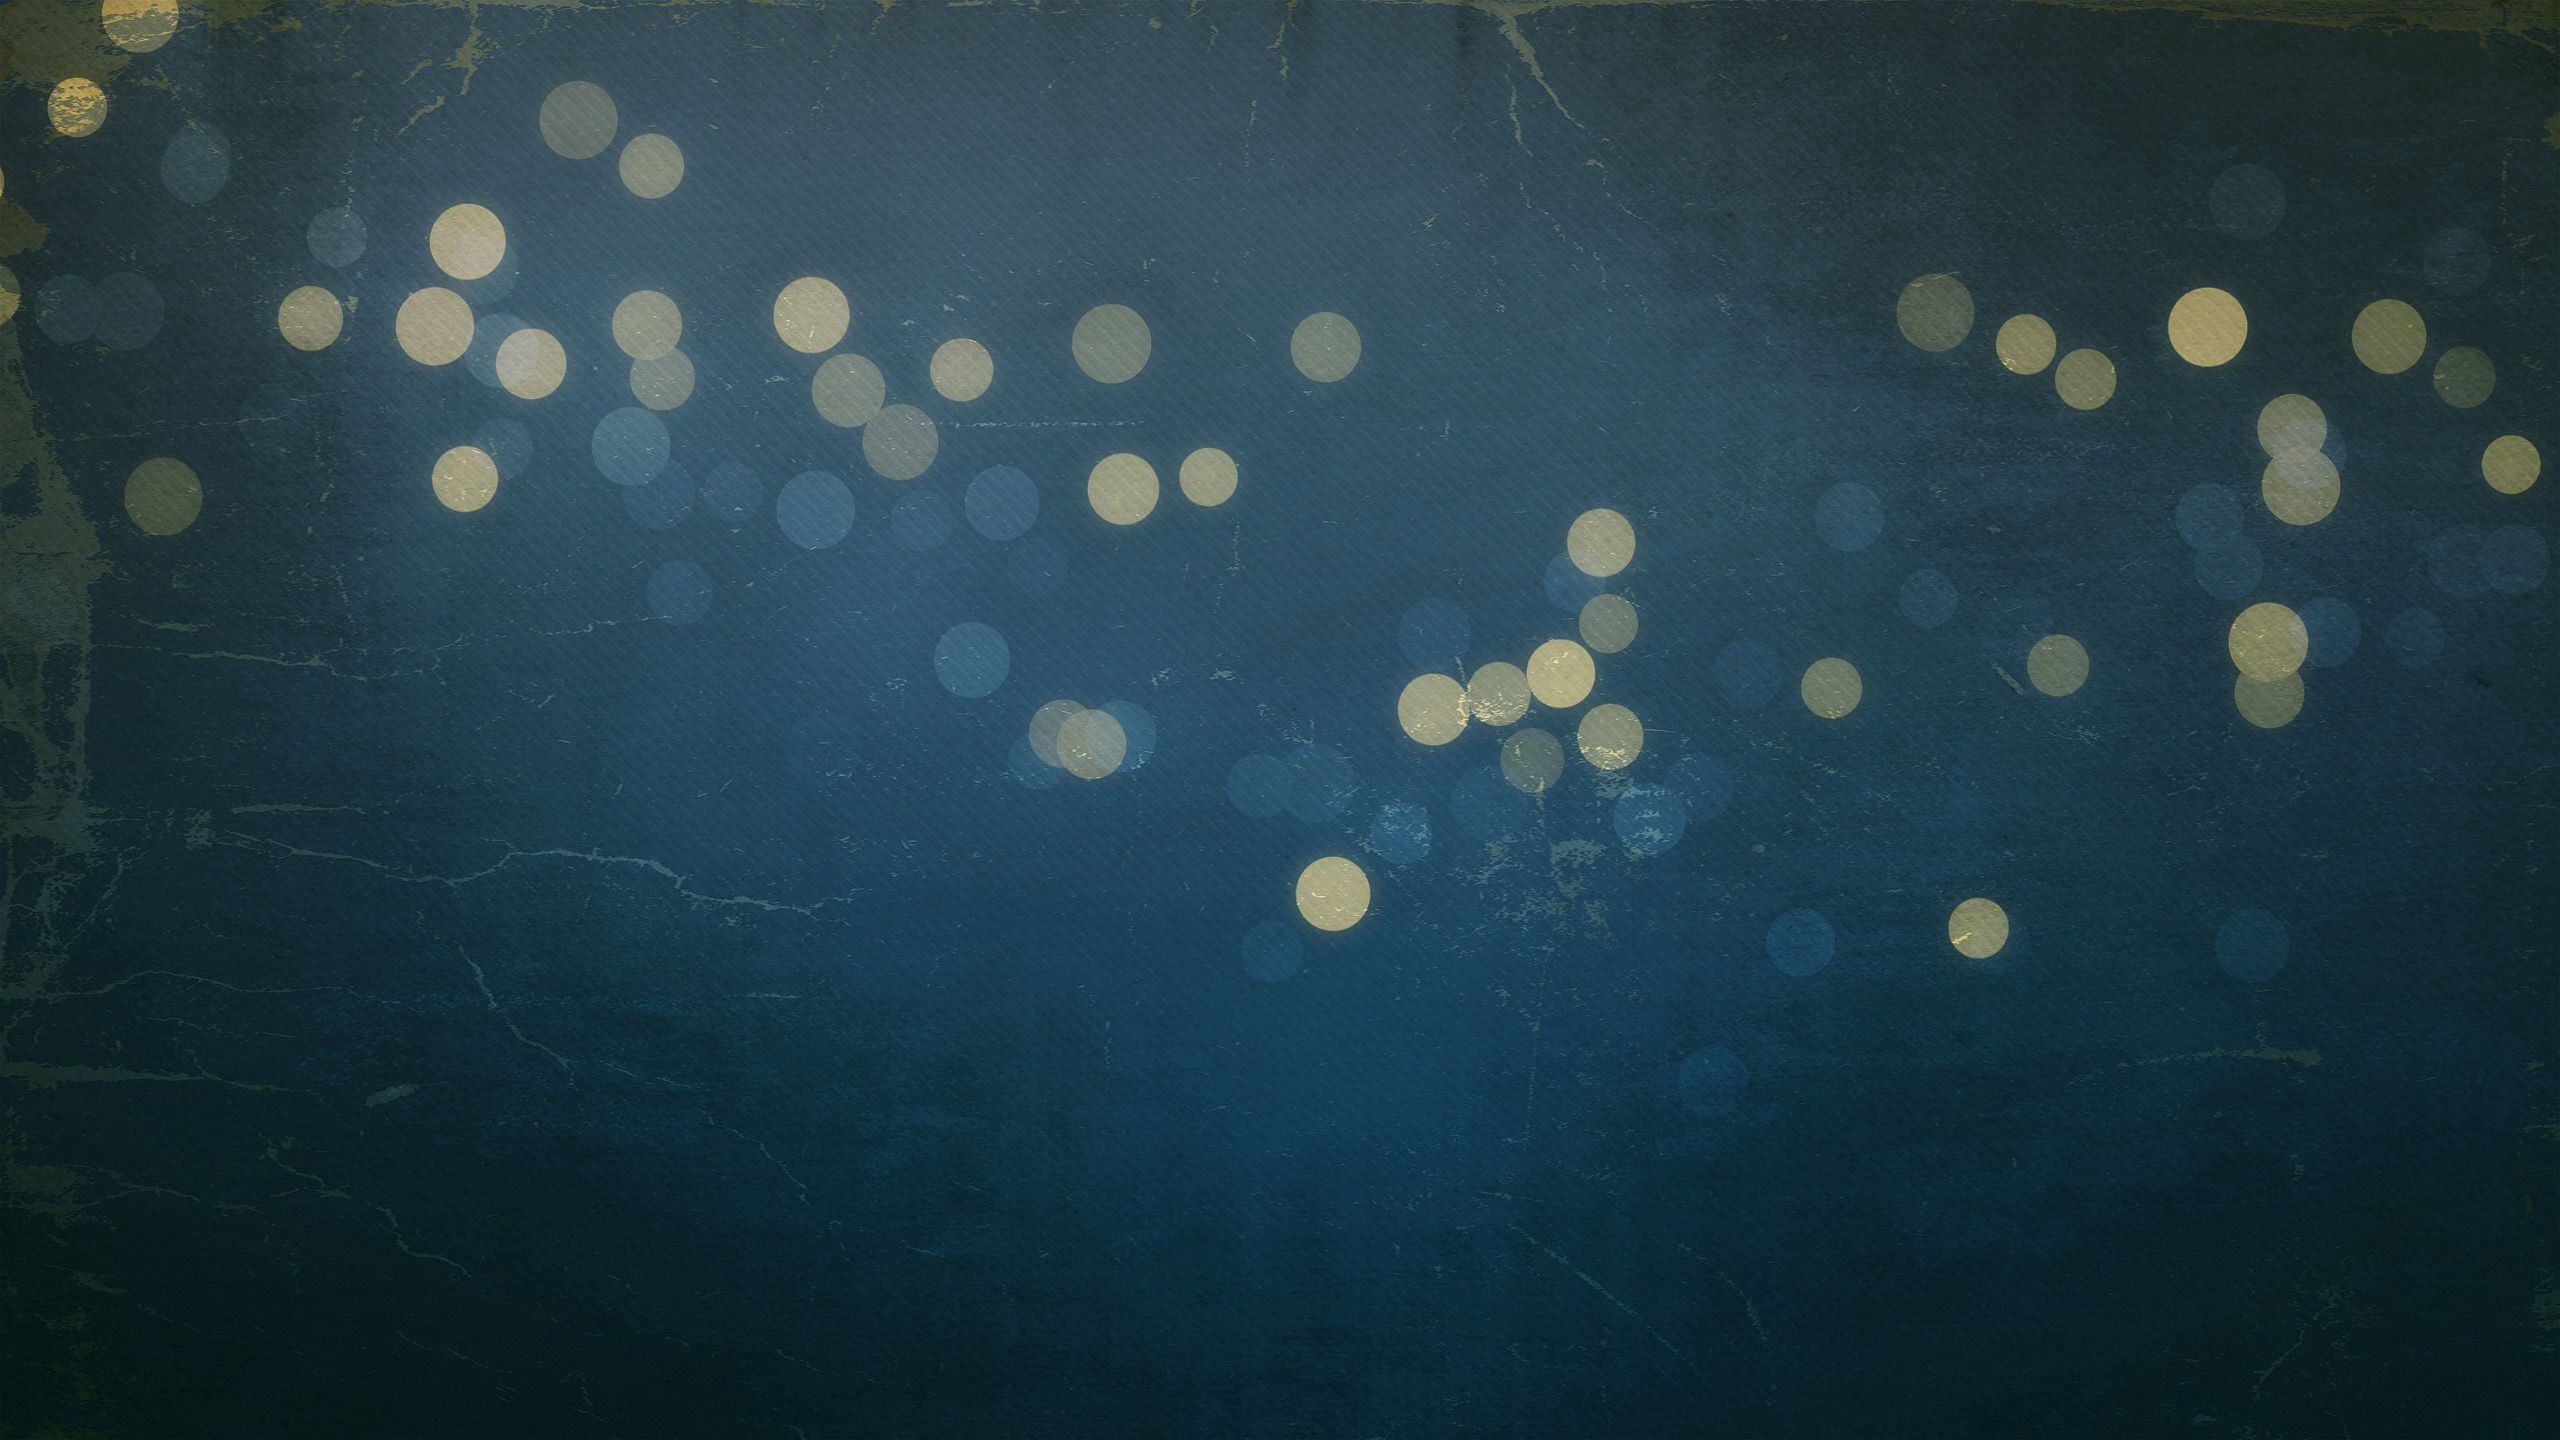 Download background textures, spots, background, glare, circles, texture, stains